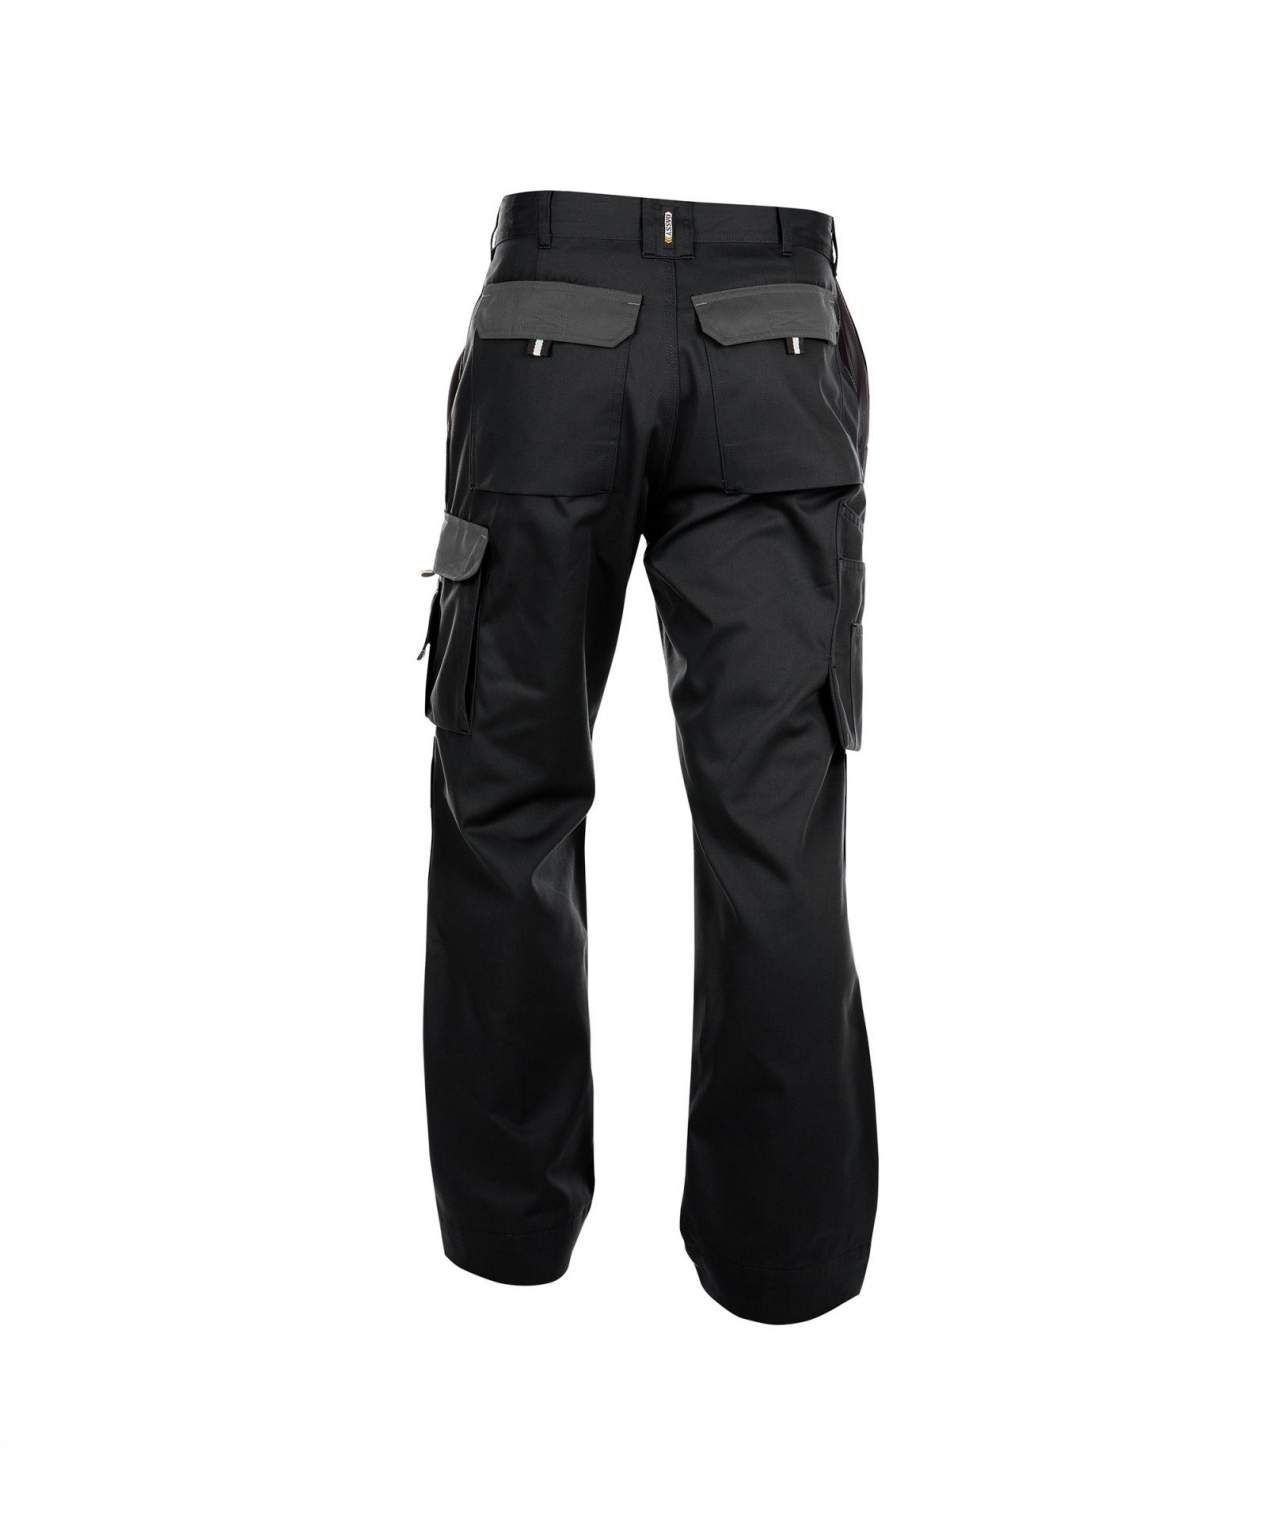 boston two tone work trousers with knee pockets black cement grey back